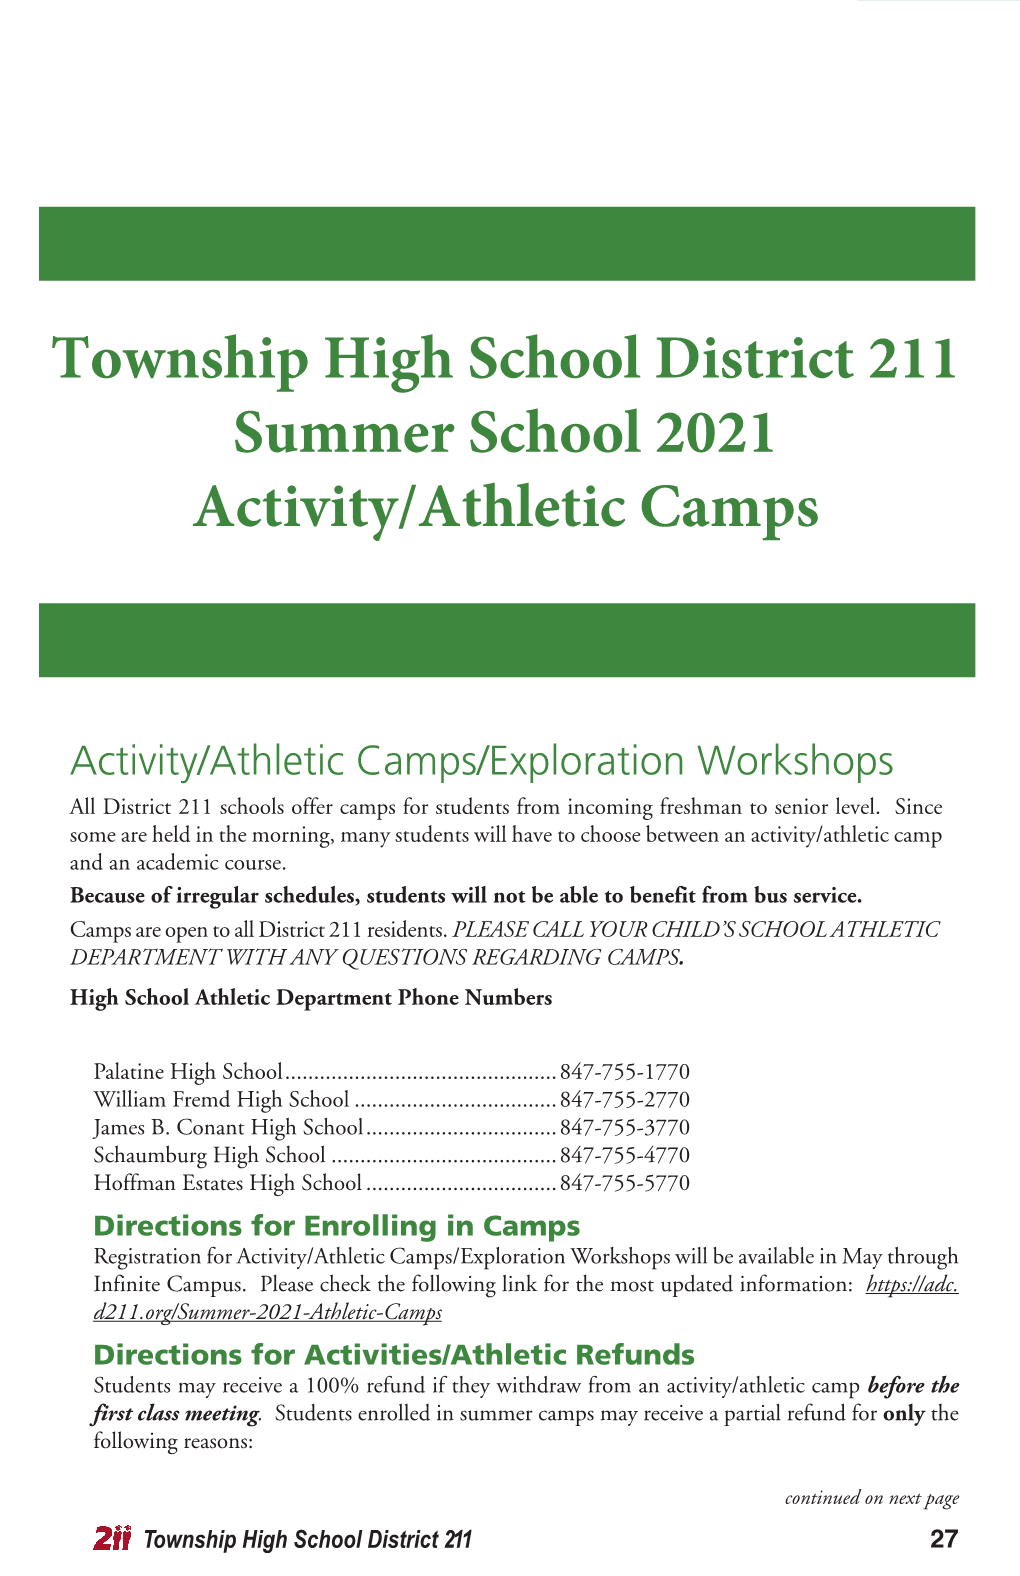 Activity/Athletic Camps/Exploration Workshops All District 211 Schools Offer Camps for Students from Incoming Freshman to Senior Level